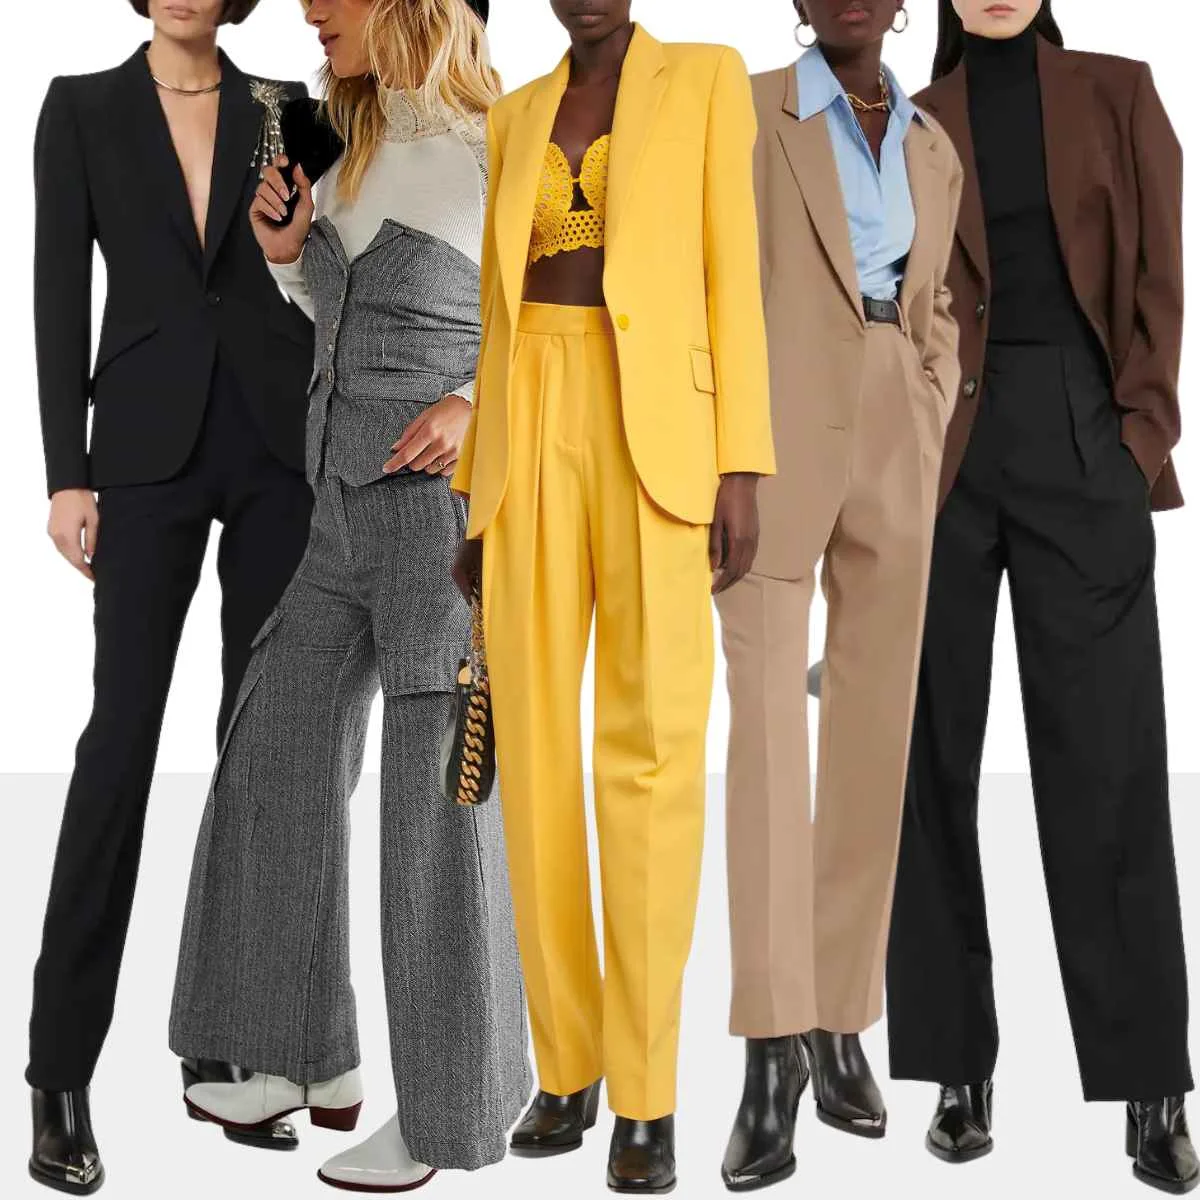 Collage of 5 women wearing various pantsuits with western boots.